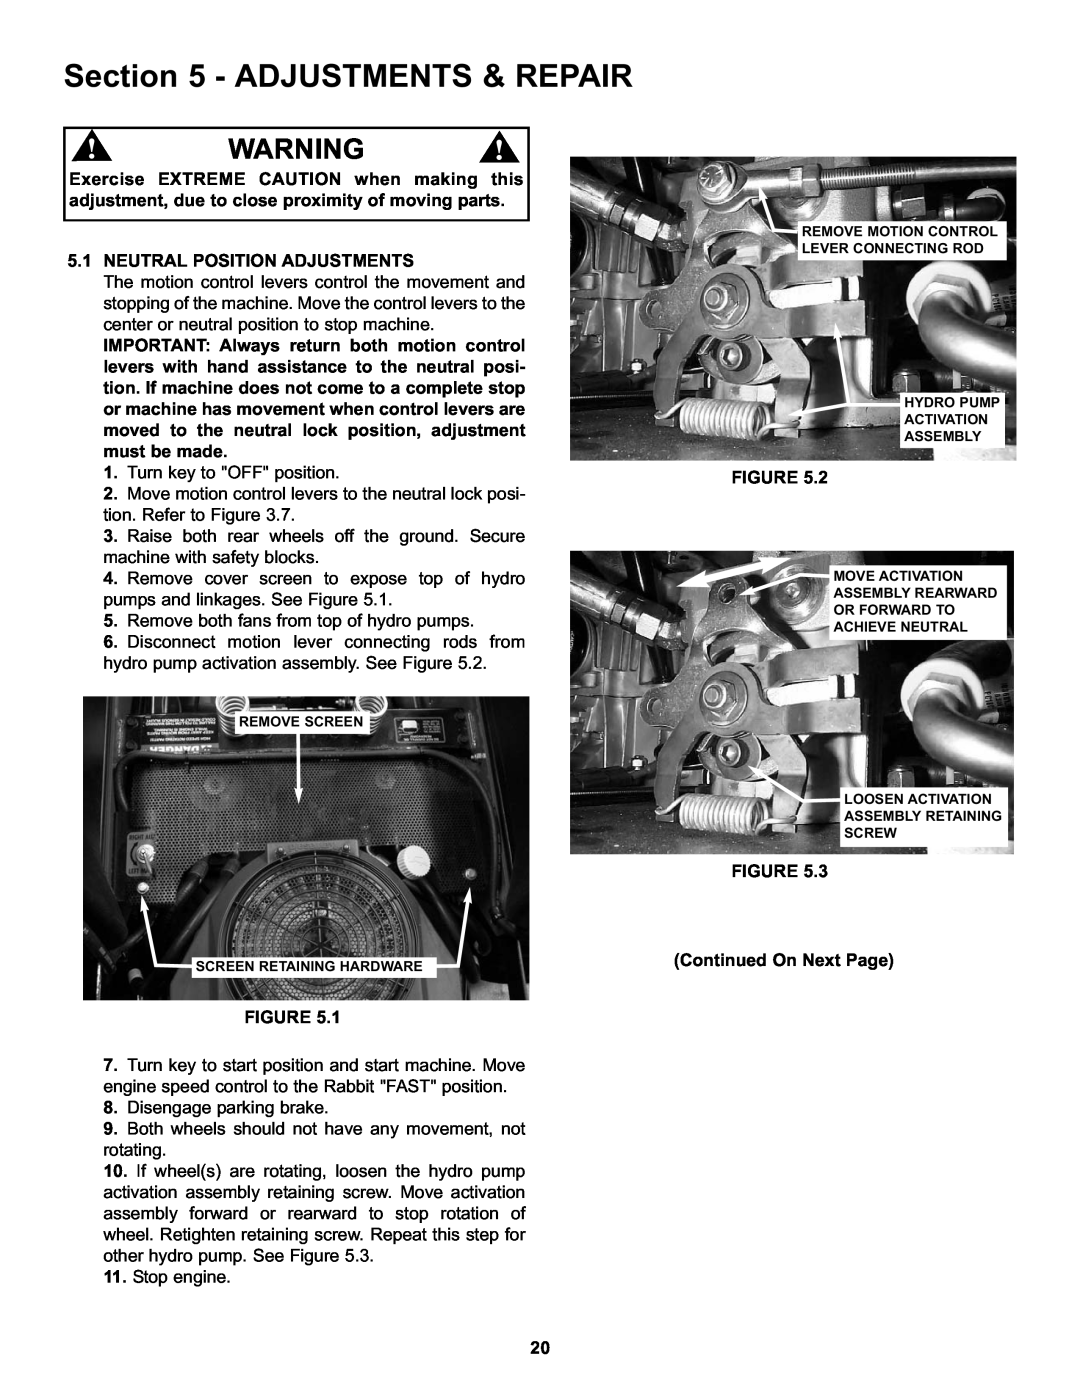 Snapper CZT19481KWV Adjustmentsoperainginstructions& Repair, Neutral Position Adjustments, Continued On Next Page 